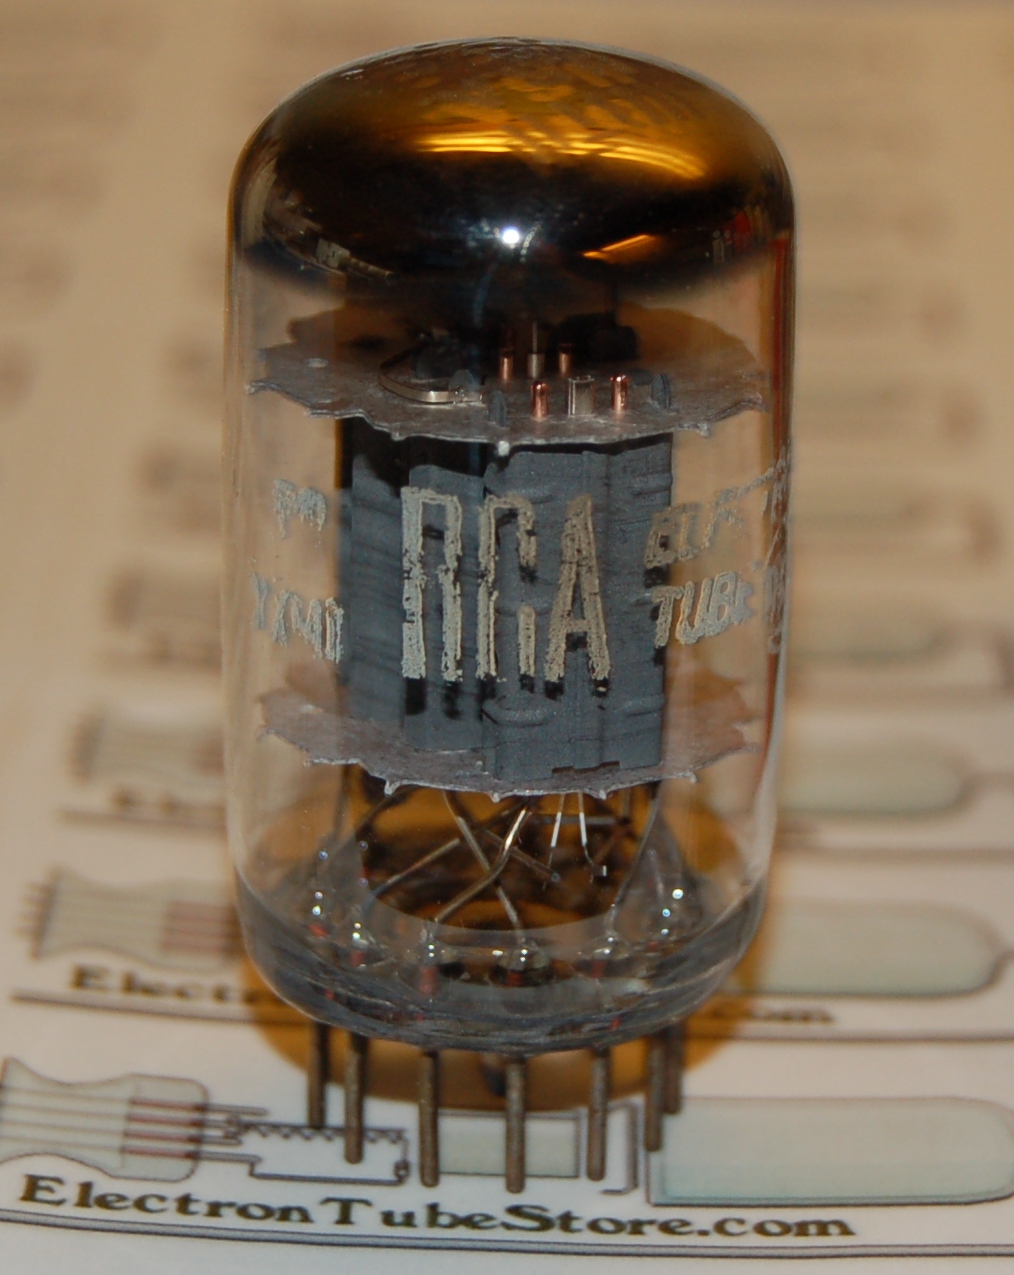 11BT11 double triode and pentode tube